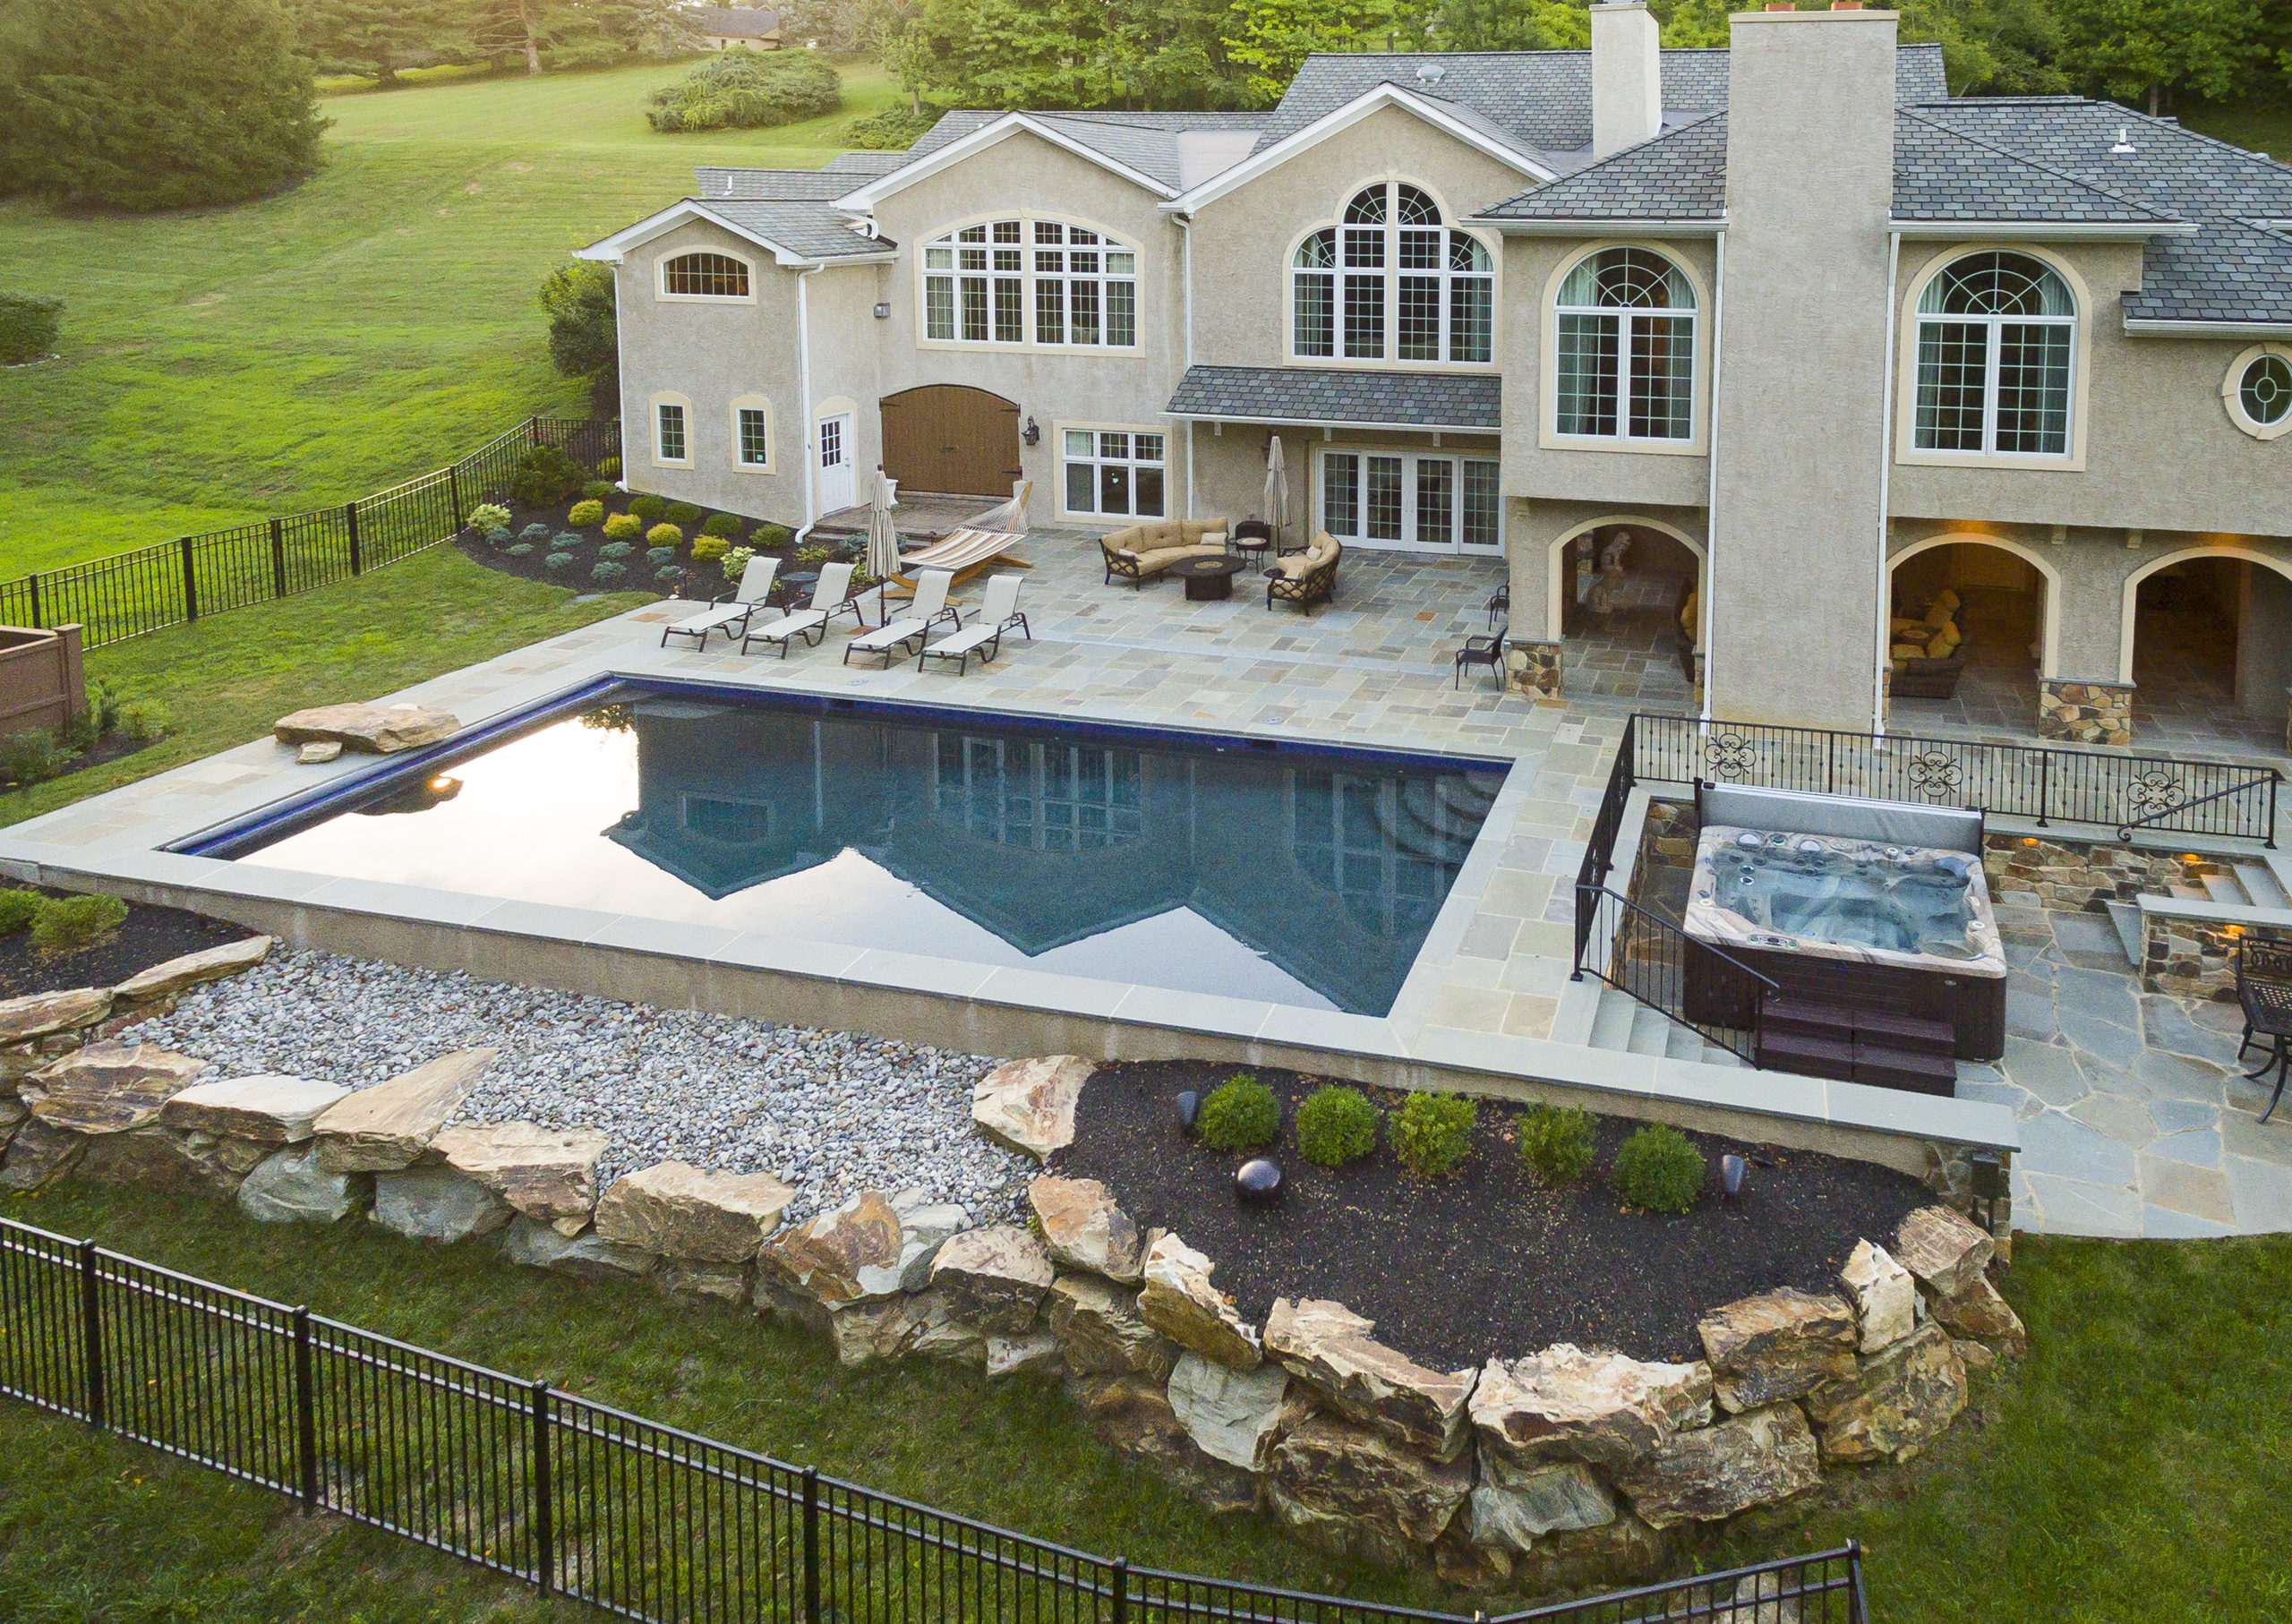 In-ground pool and hot tub